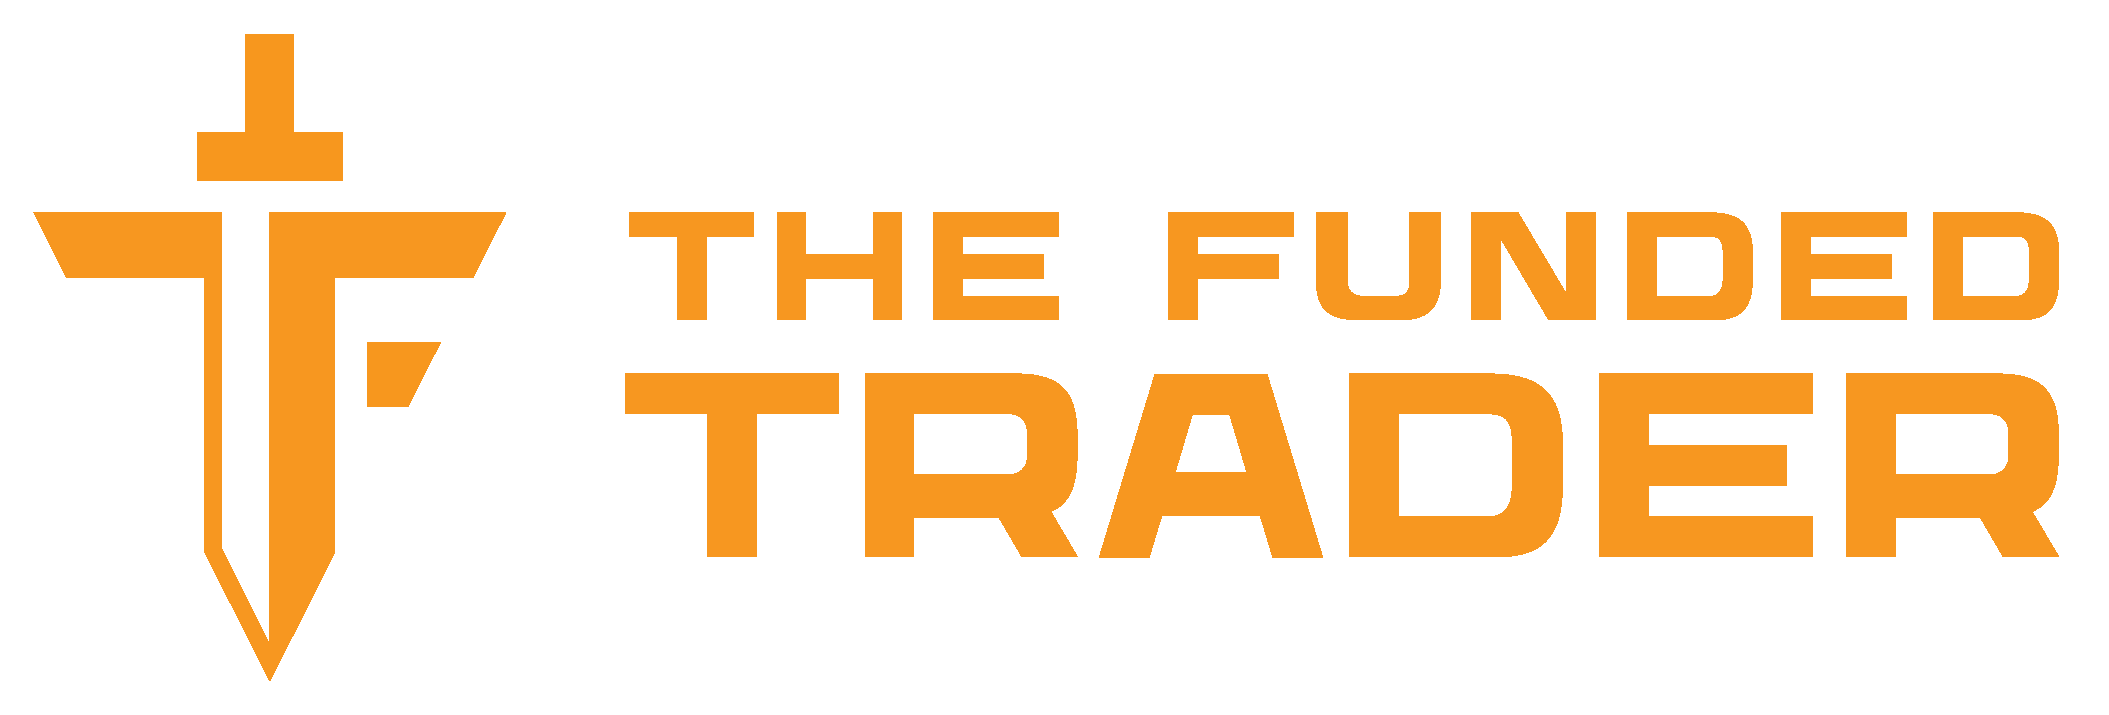 the_funded_trader_logo_purple